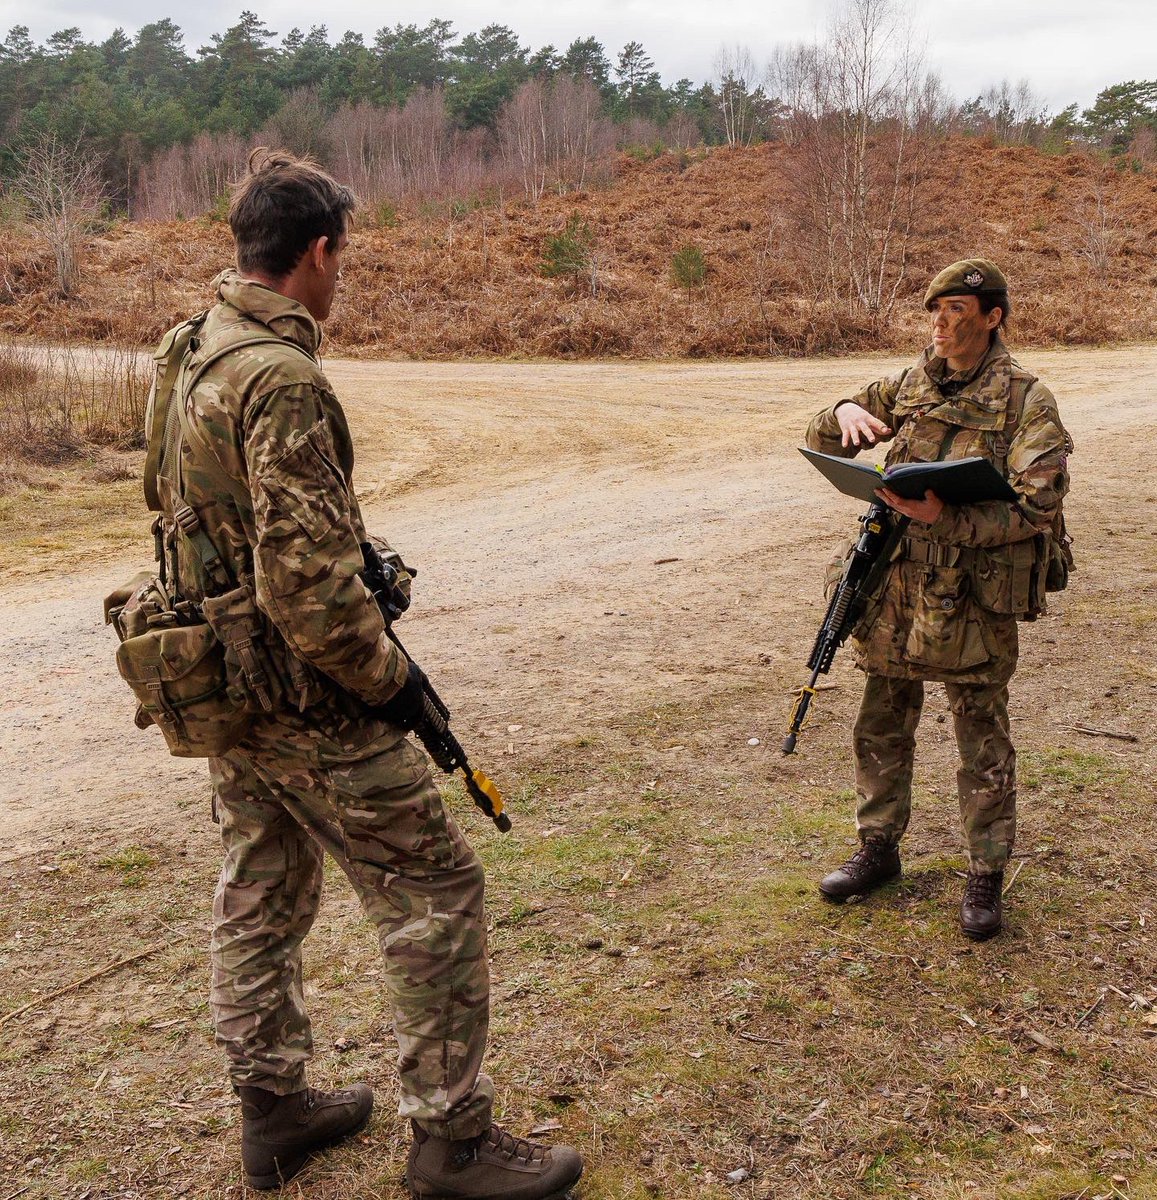 Over the weekend, 40 HAC soldiers completed final test exercises for a qualification that will allow them to plan and execute realistic battle training within their subunits, using a wide range of small arms and pyrotechnics.